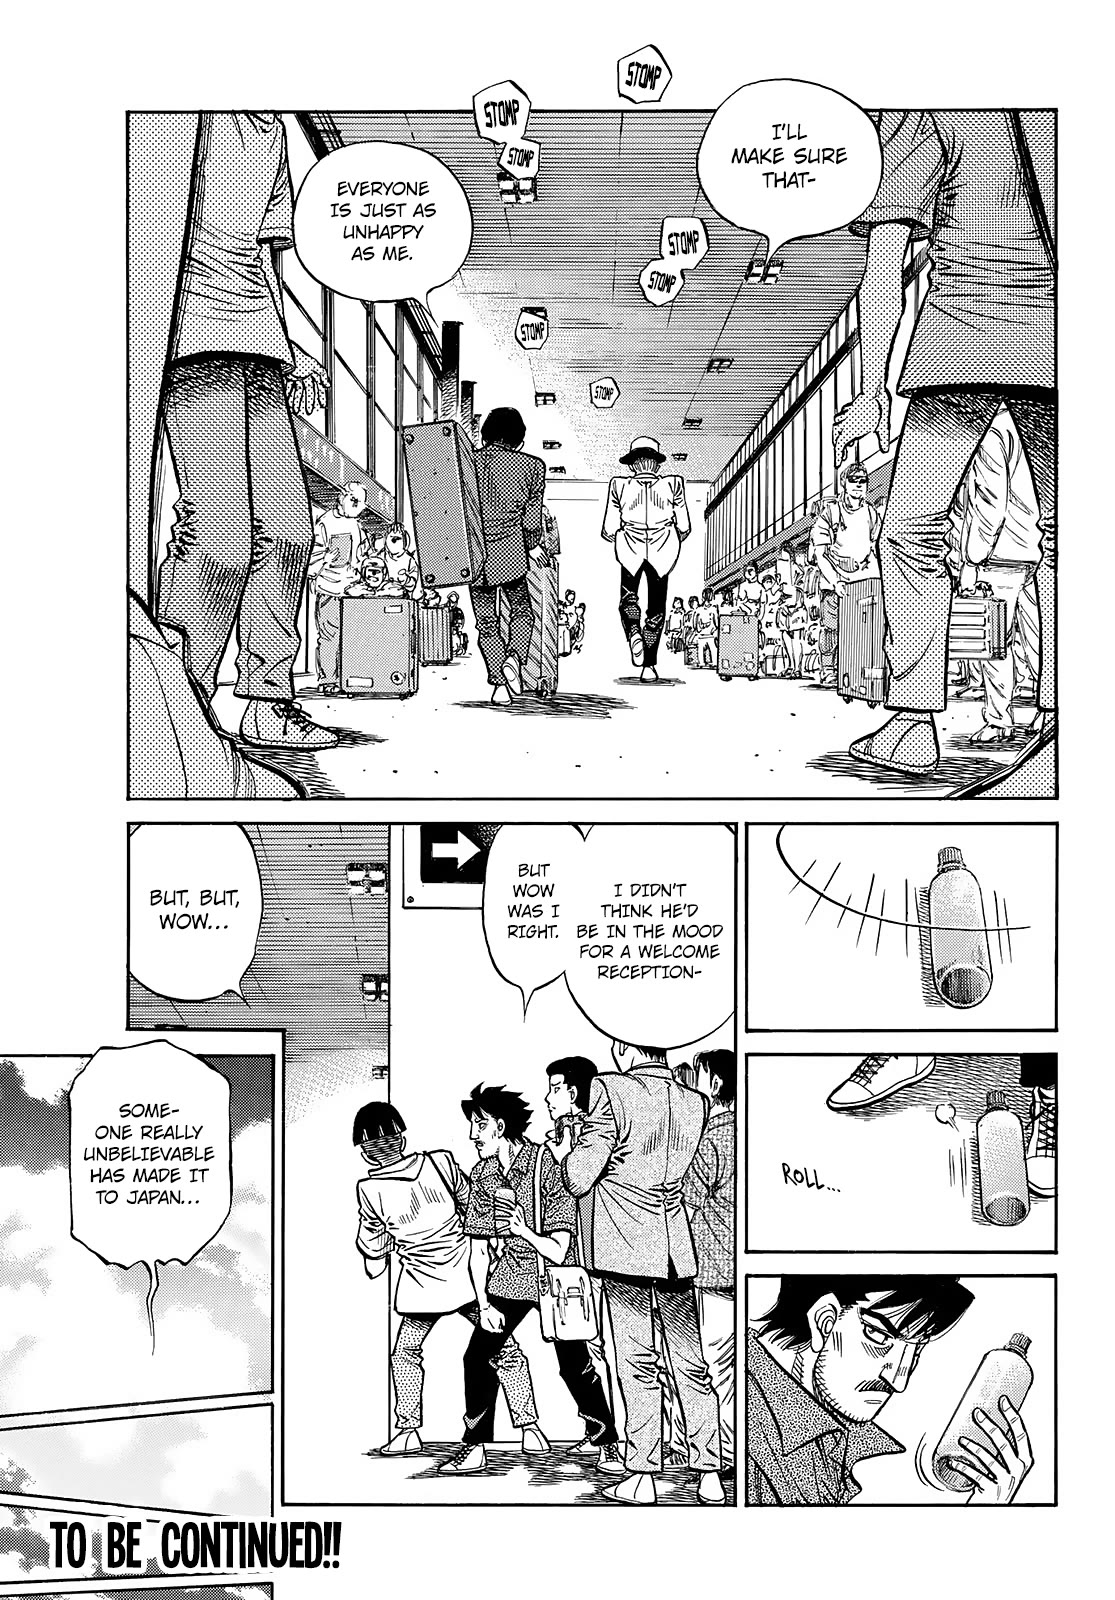 Hajime no Ippo, Chapter 1446 Round 1446 Rosario Arrives in Japan image 10